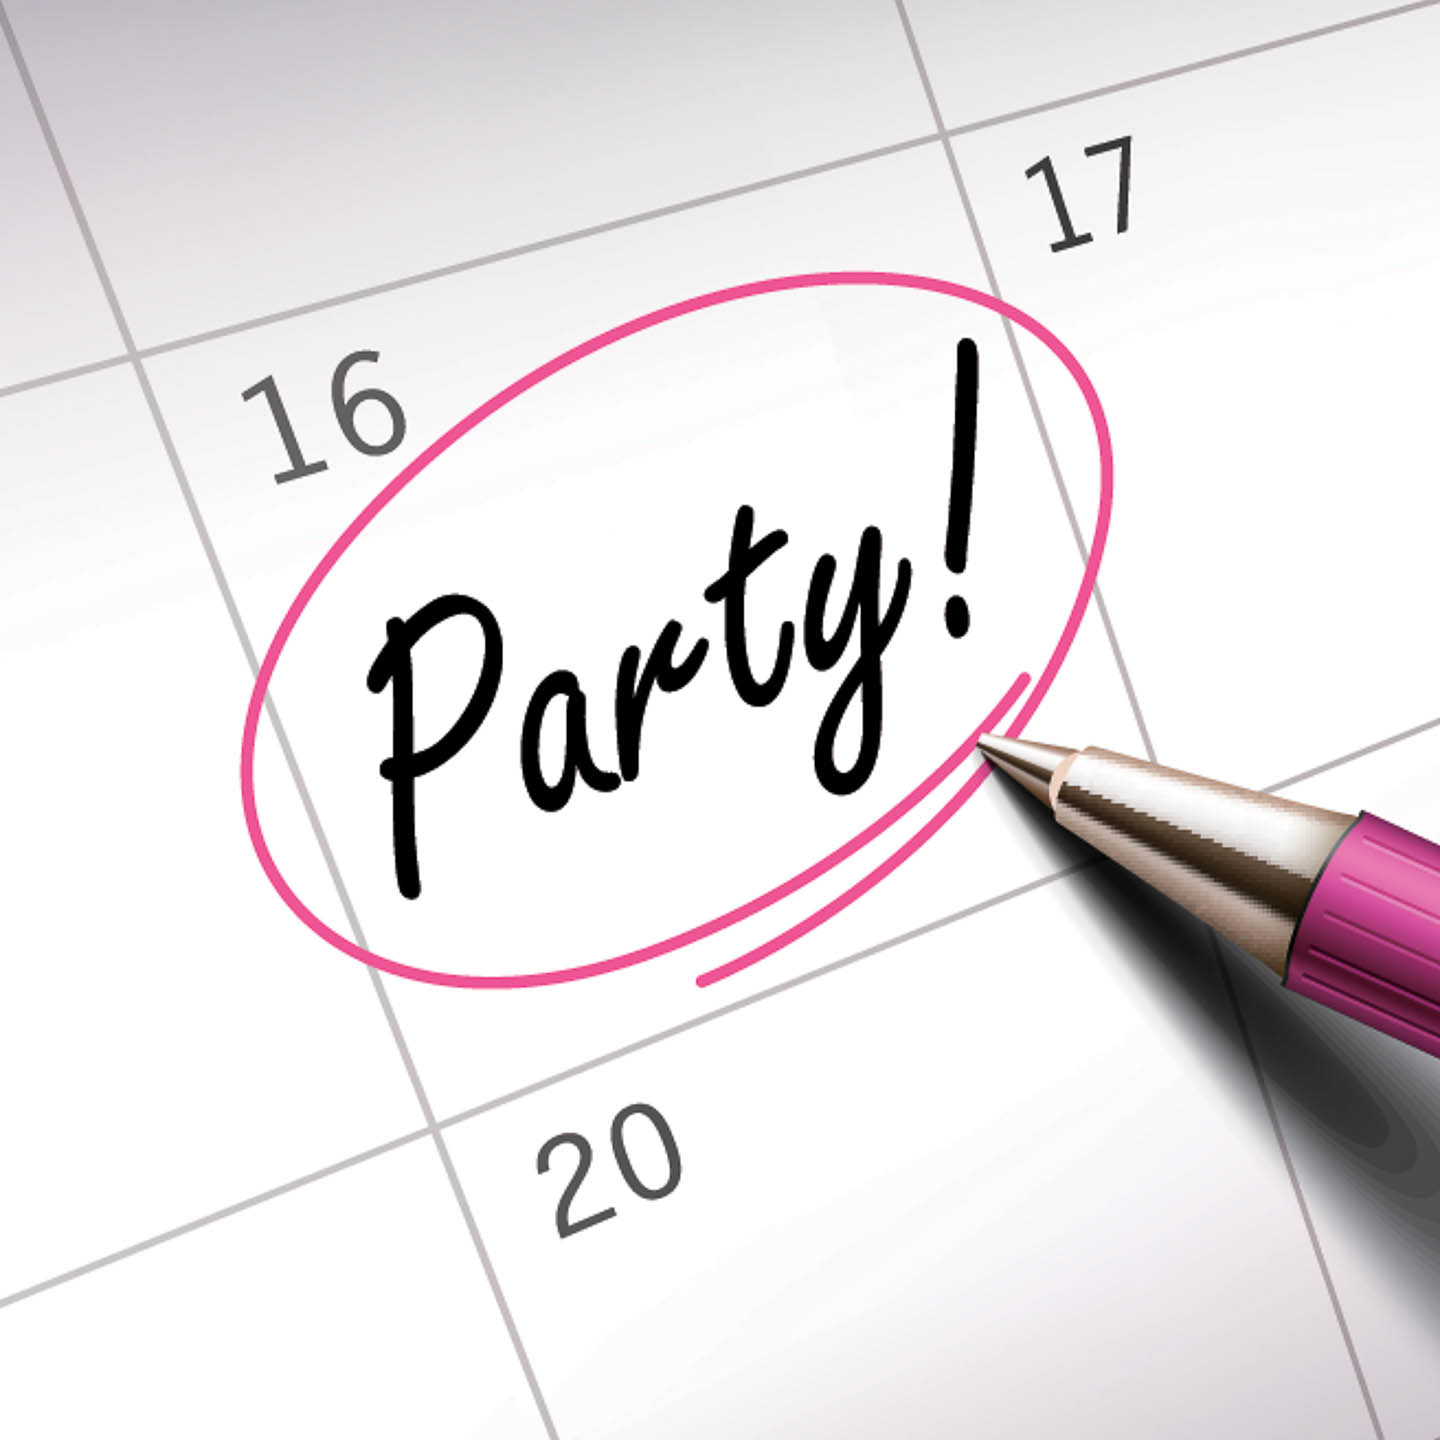 The word "Party" circled on a calendar